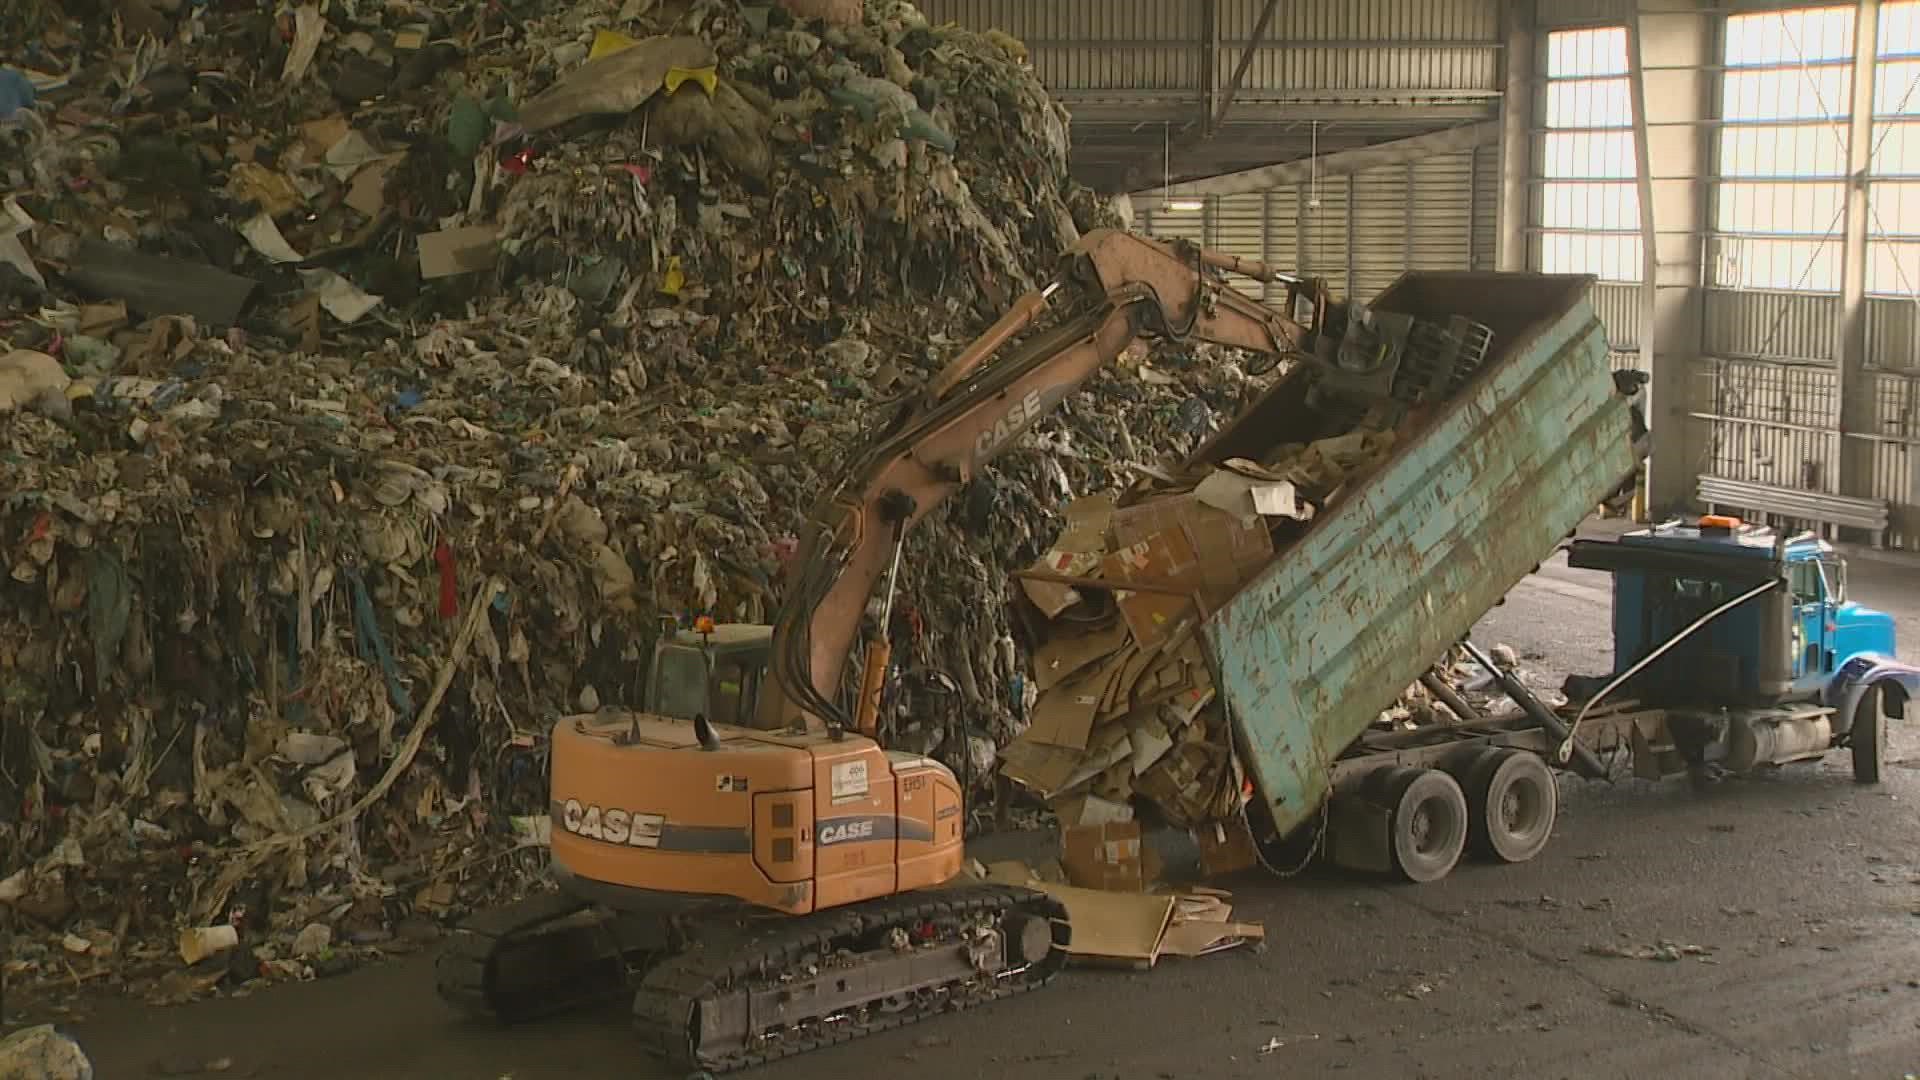 Steaming, rotting mounds of garbage, one of them at least 45-feet high, fill the Everett transfer station.